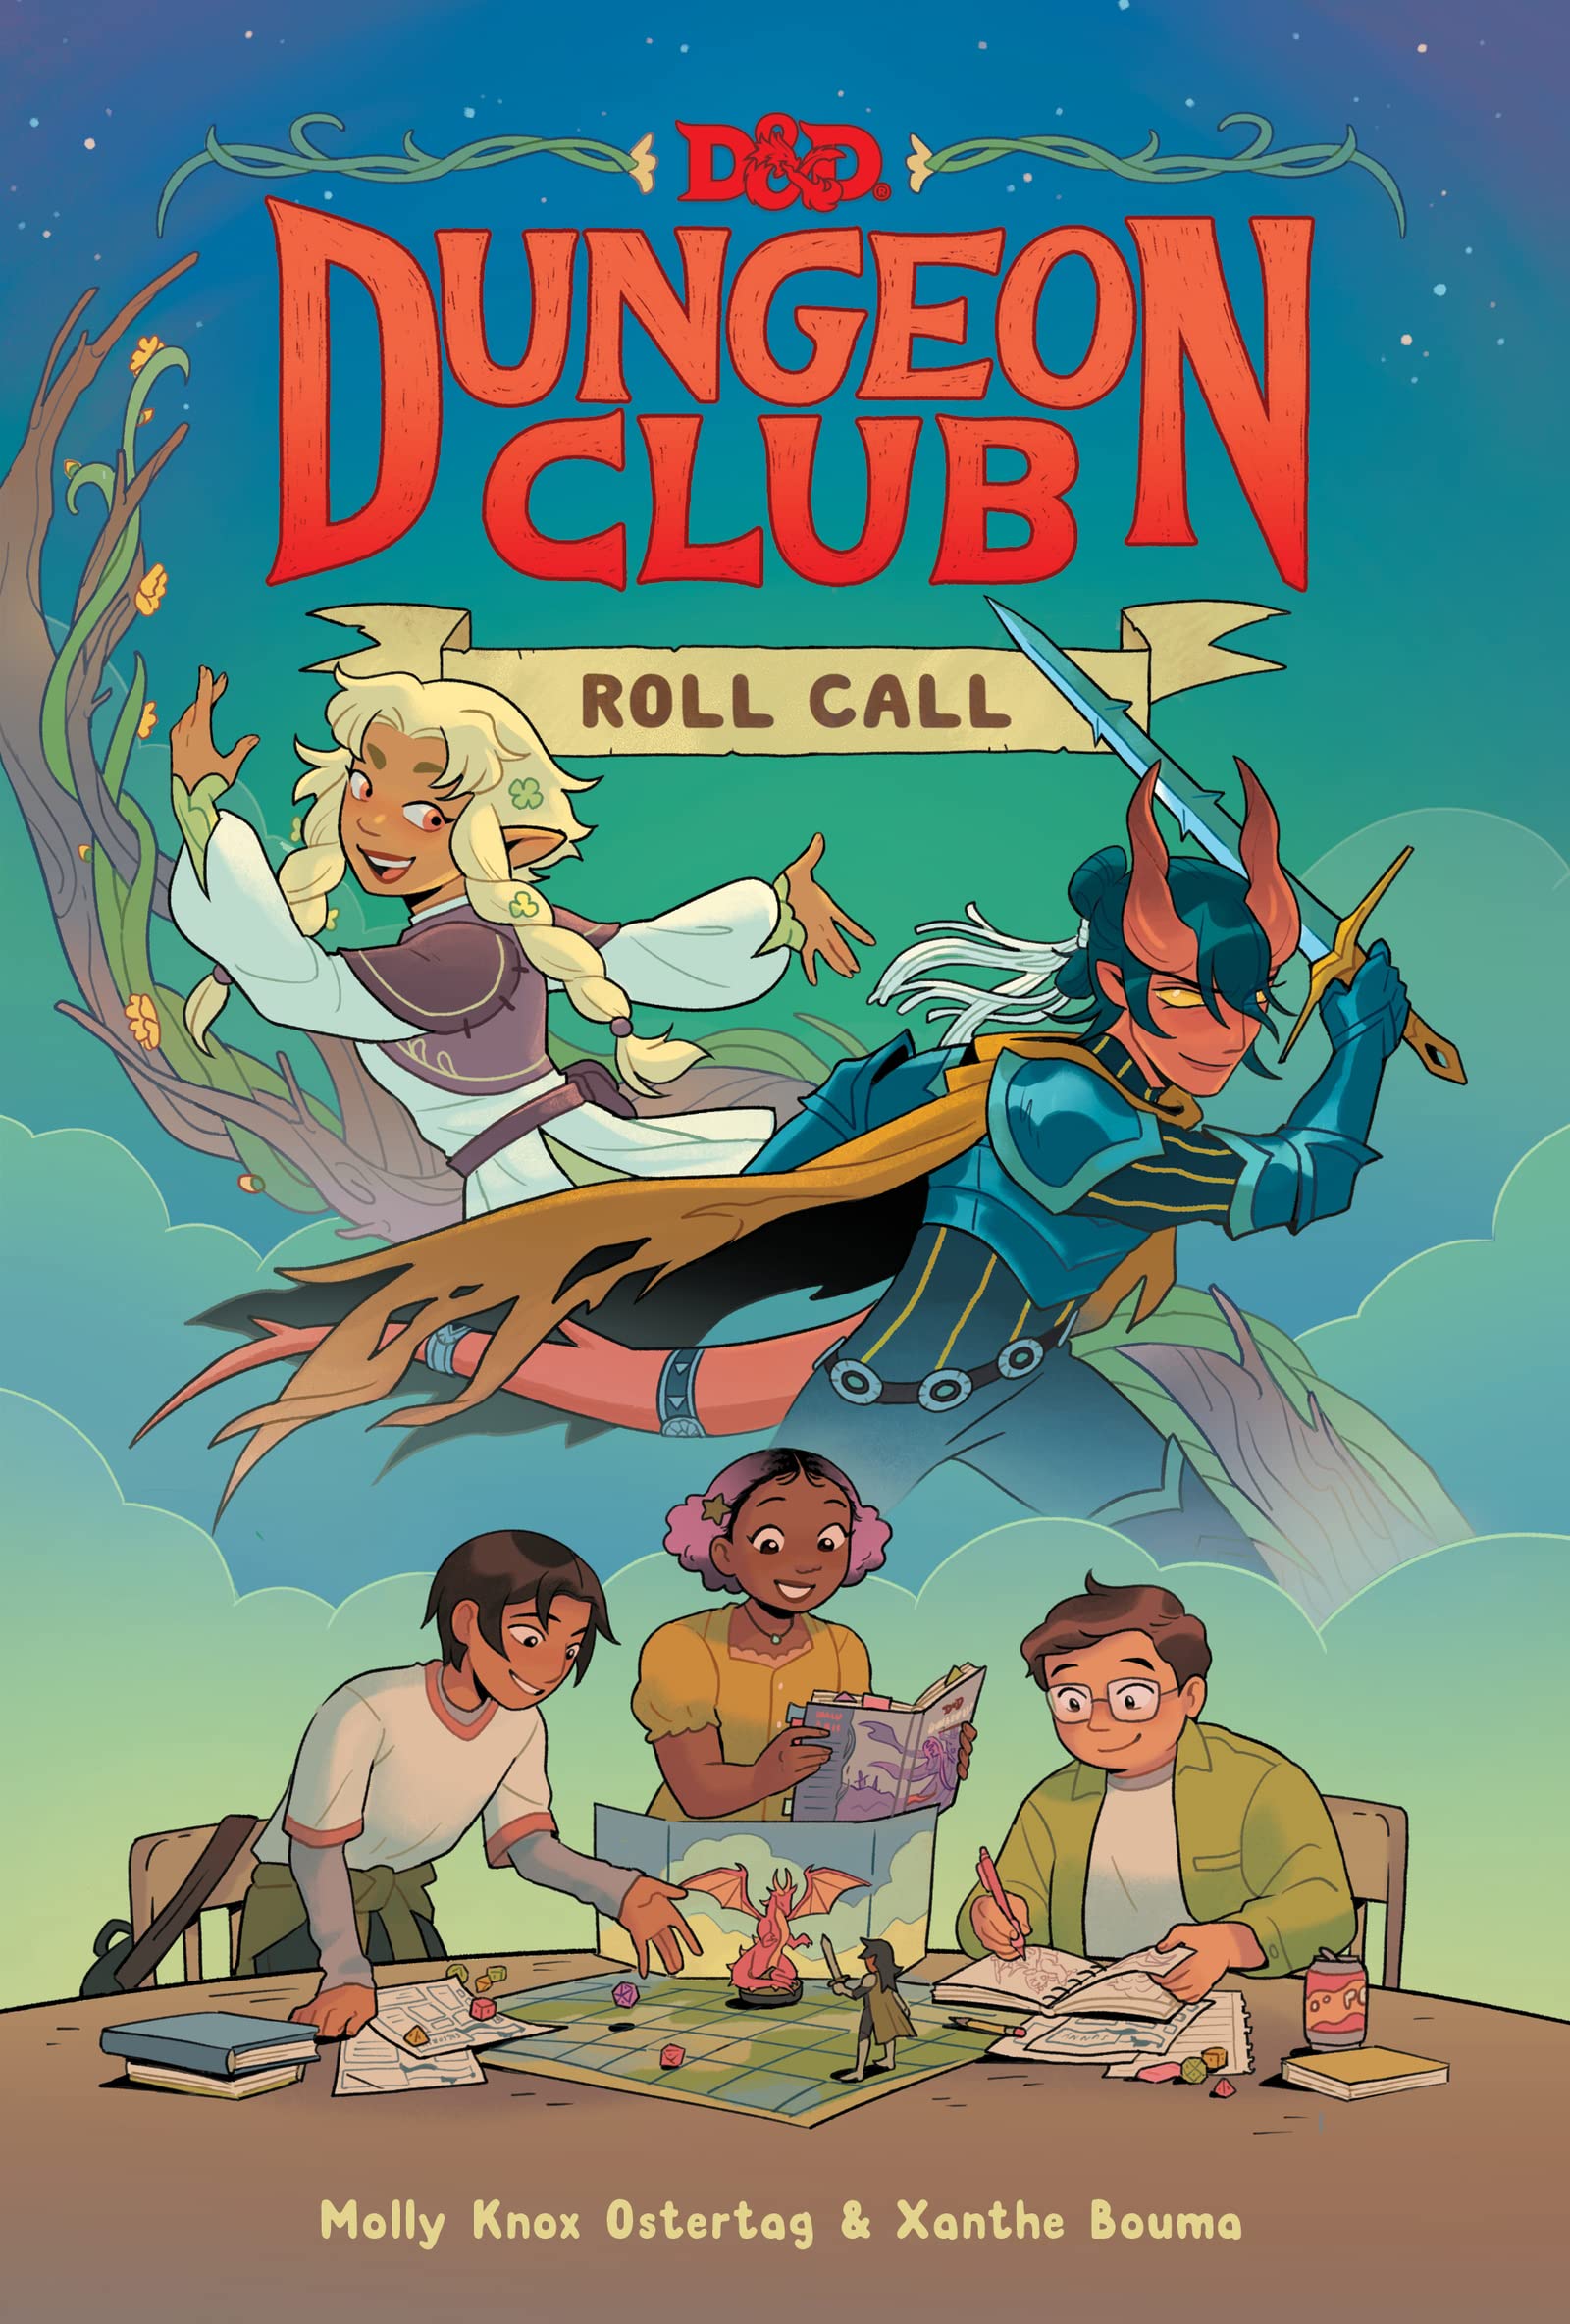 Dungeons and Dragons Dungeon Club | This Week’s Comics